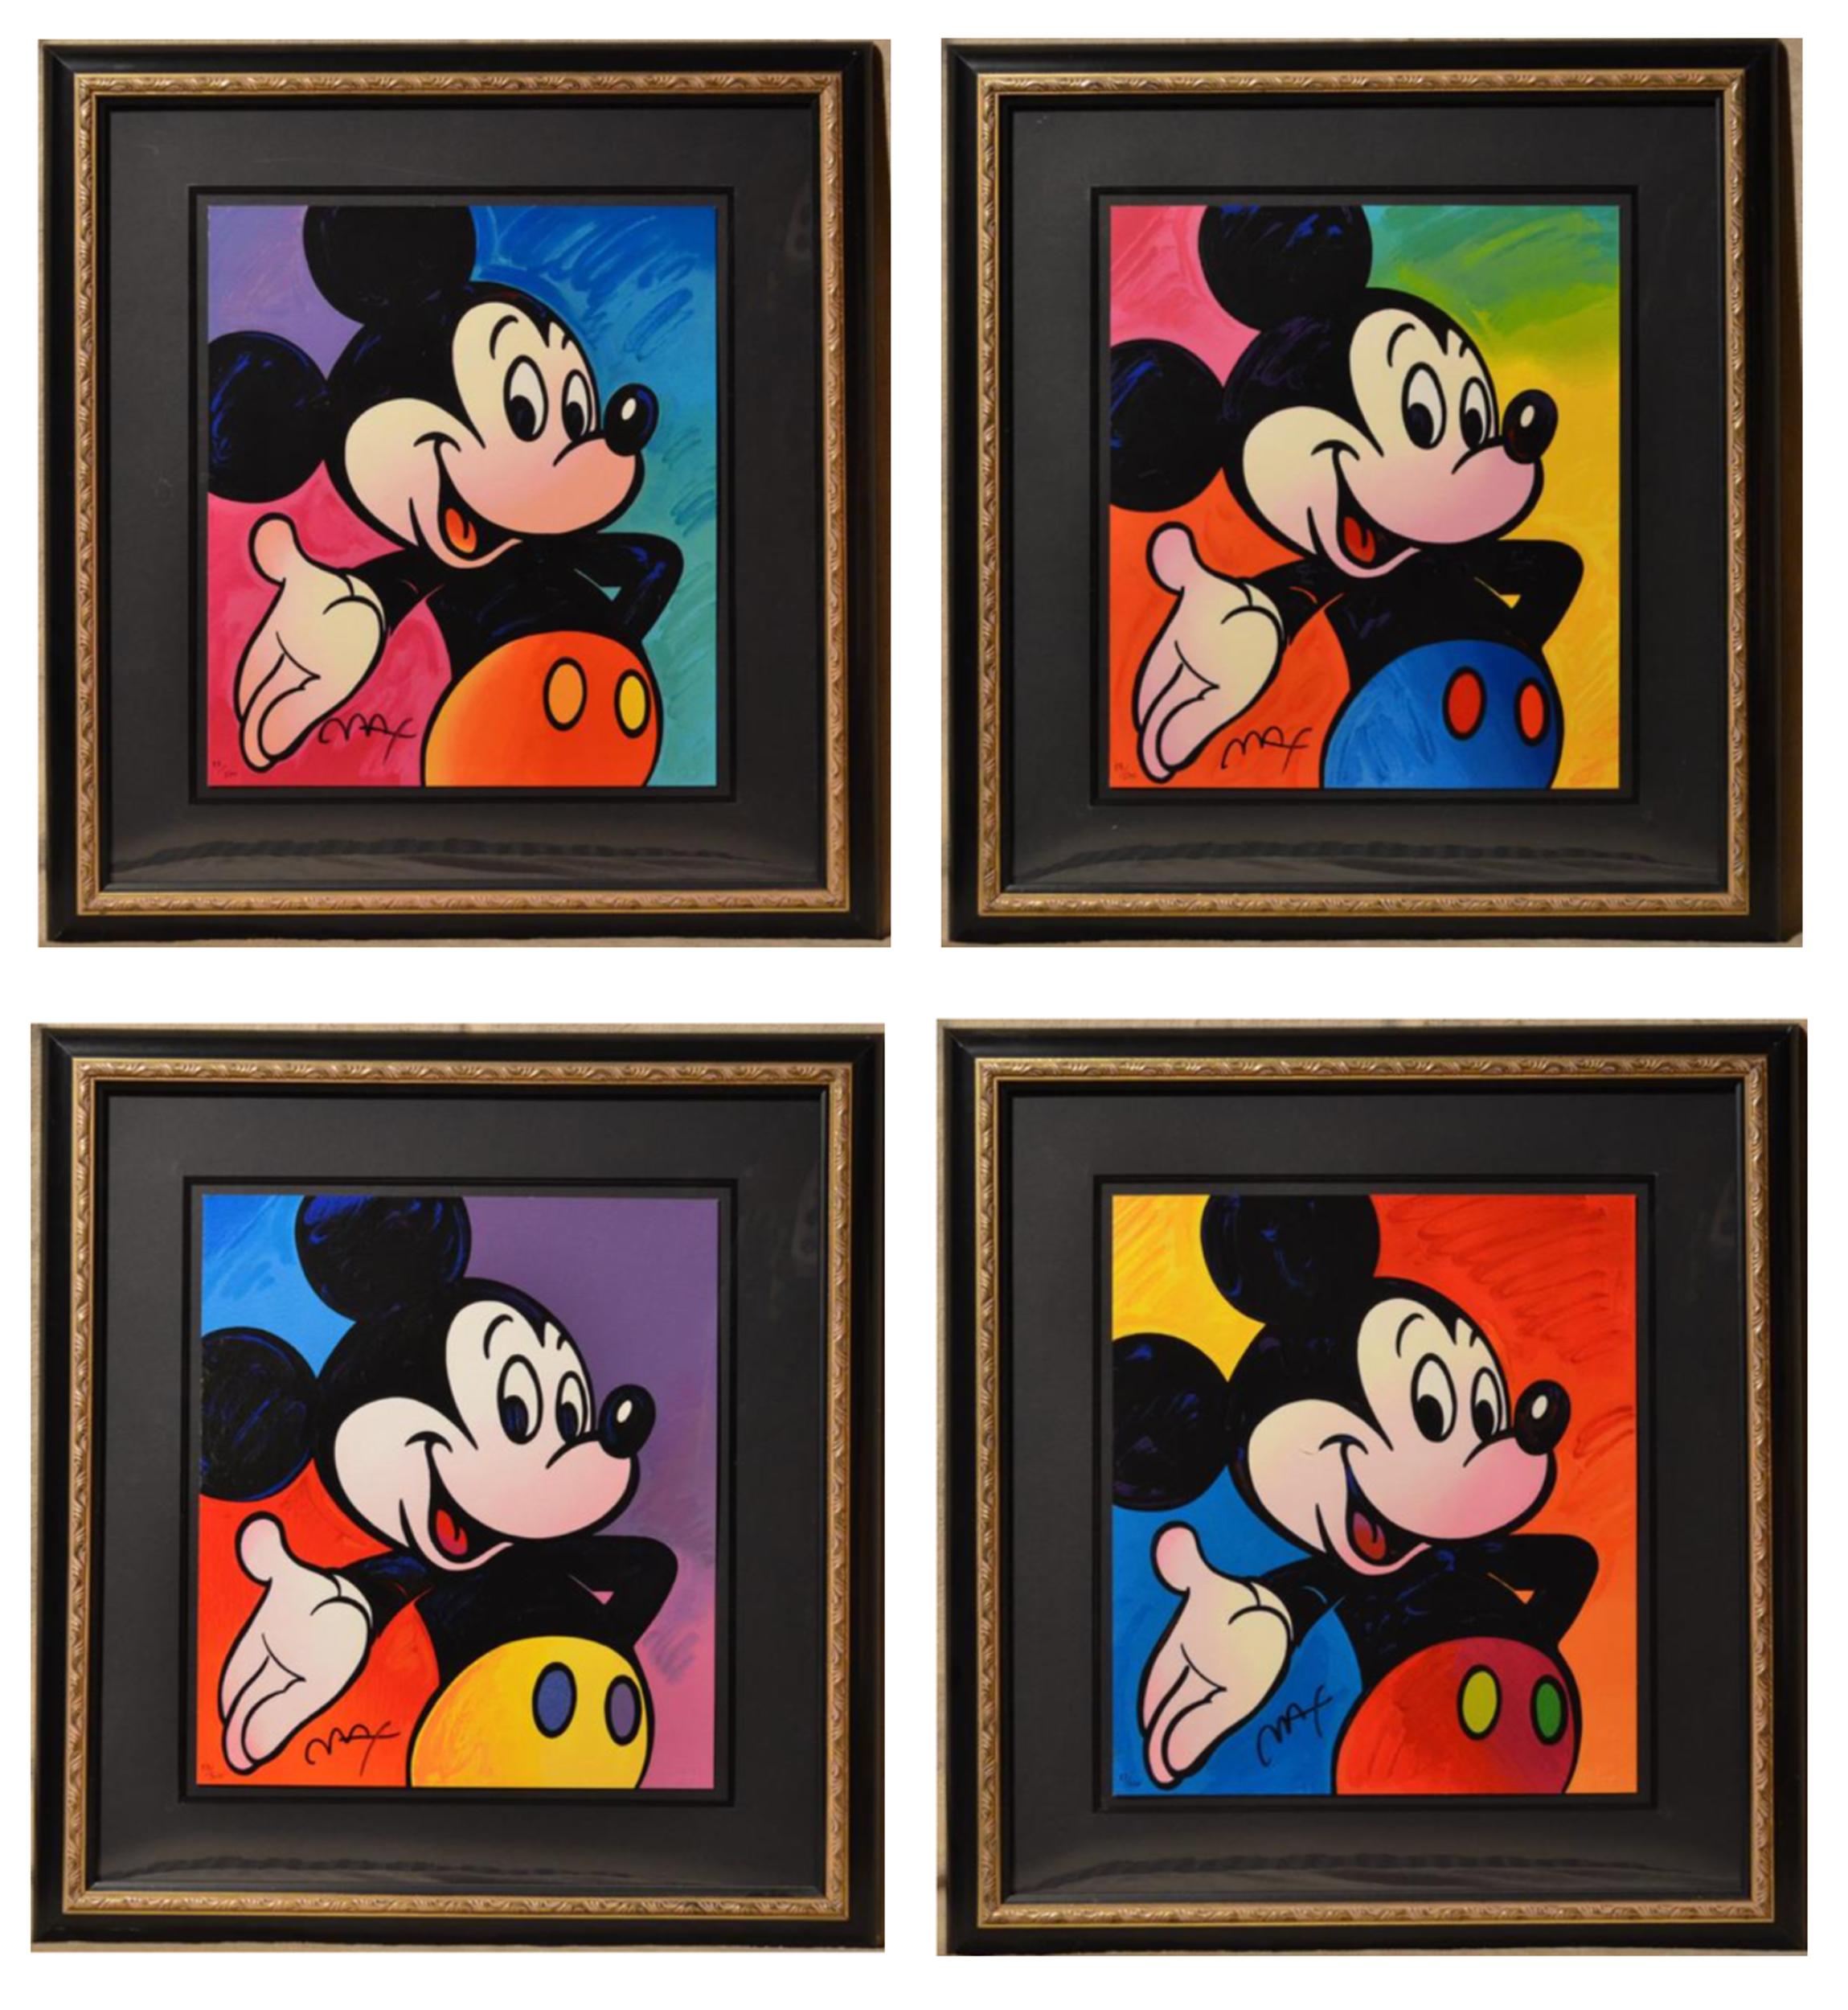 A series of four Pop Art screenprints of the famed Disney character, Mickey Mouse, by Psychedelic artist Peter Max. Each piece is nicely framed and signed by the artist.

Mickey Mouse
Peter Max, German/American (1937)
Date: 1995
Four Screenprints,